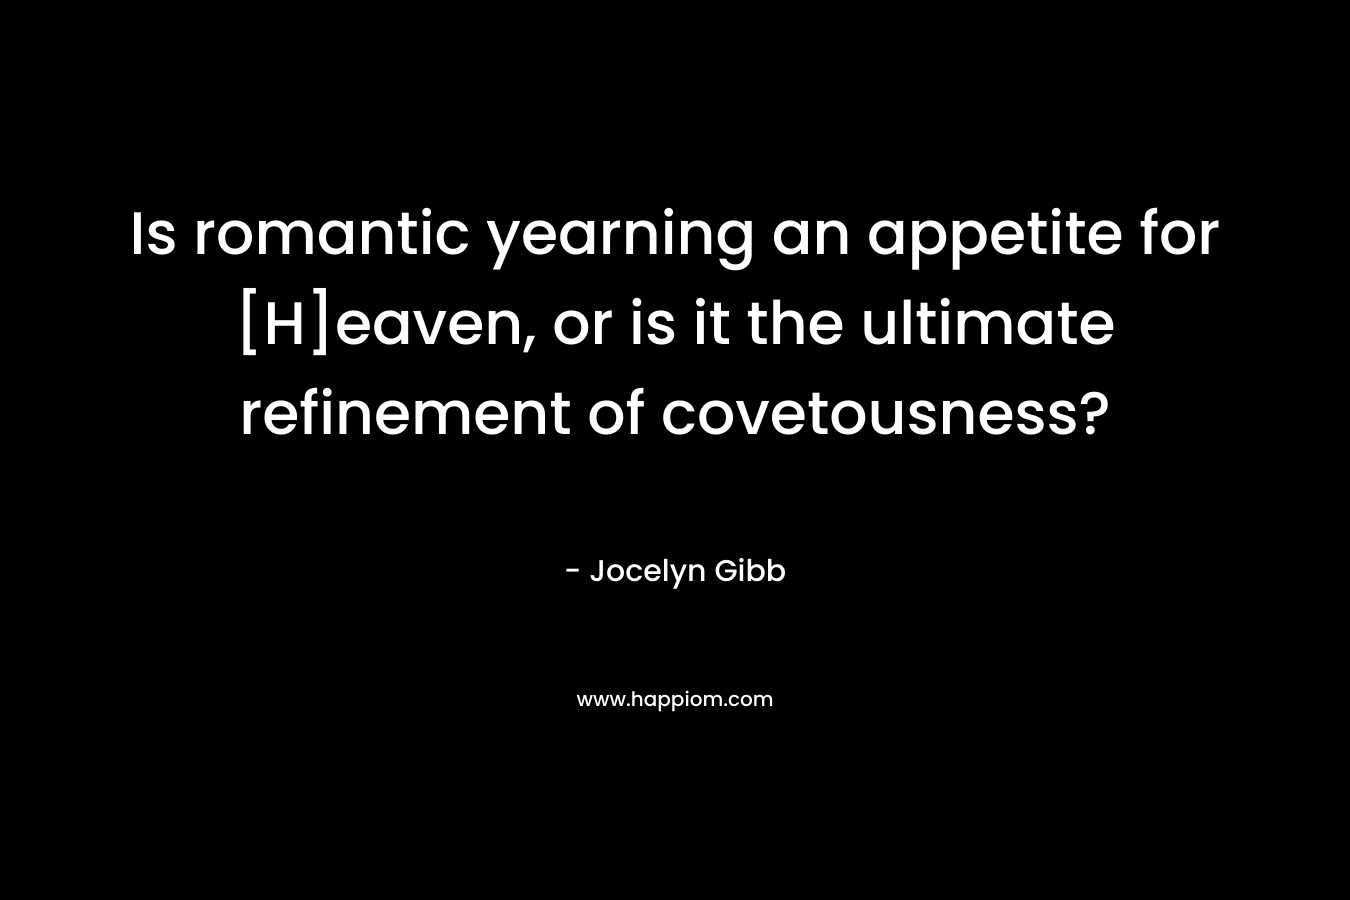 Is romantic yearning an appetite for [H]eaven, or is it the ultimate refinement of covetousness? – Jocelyn Gibb